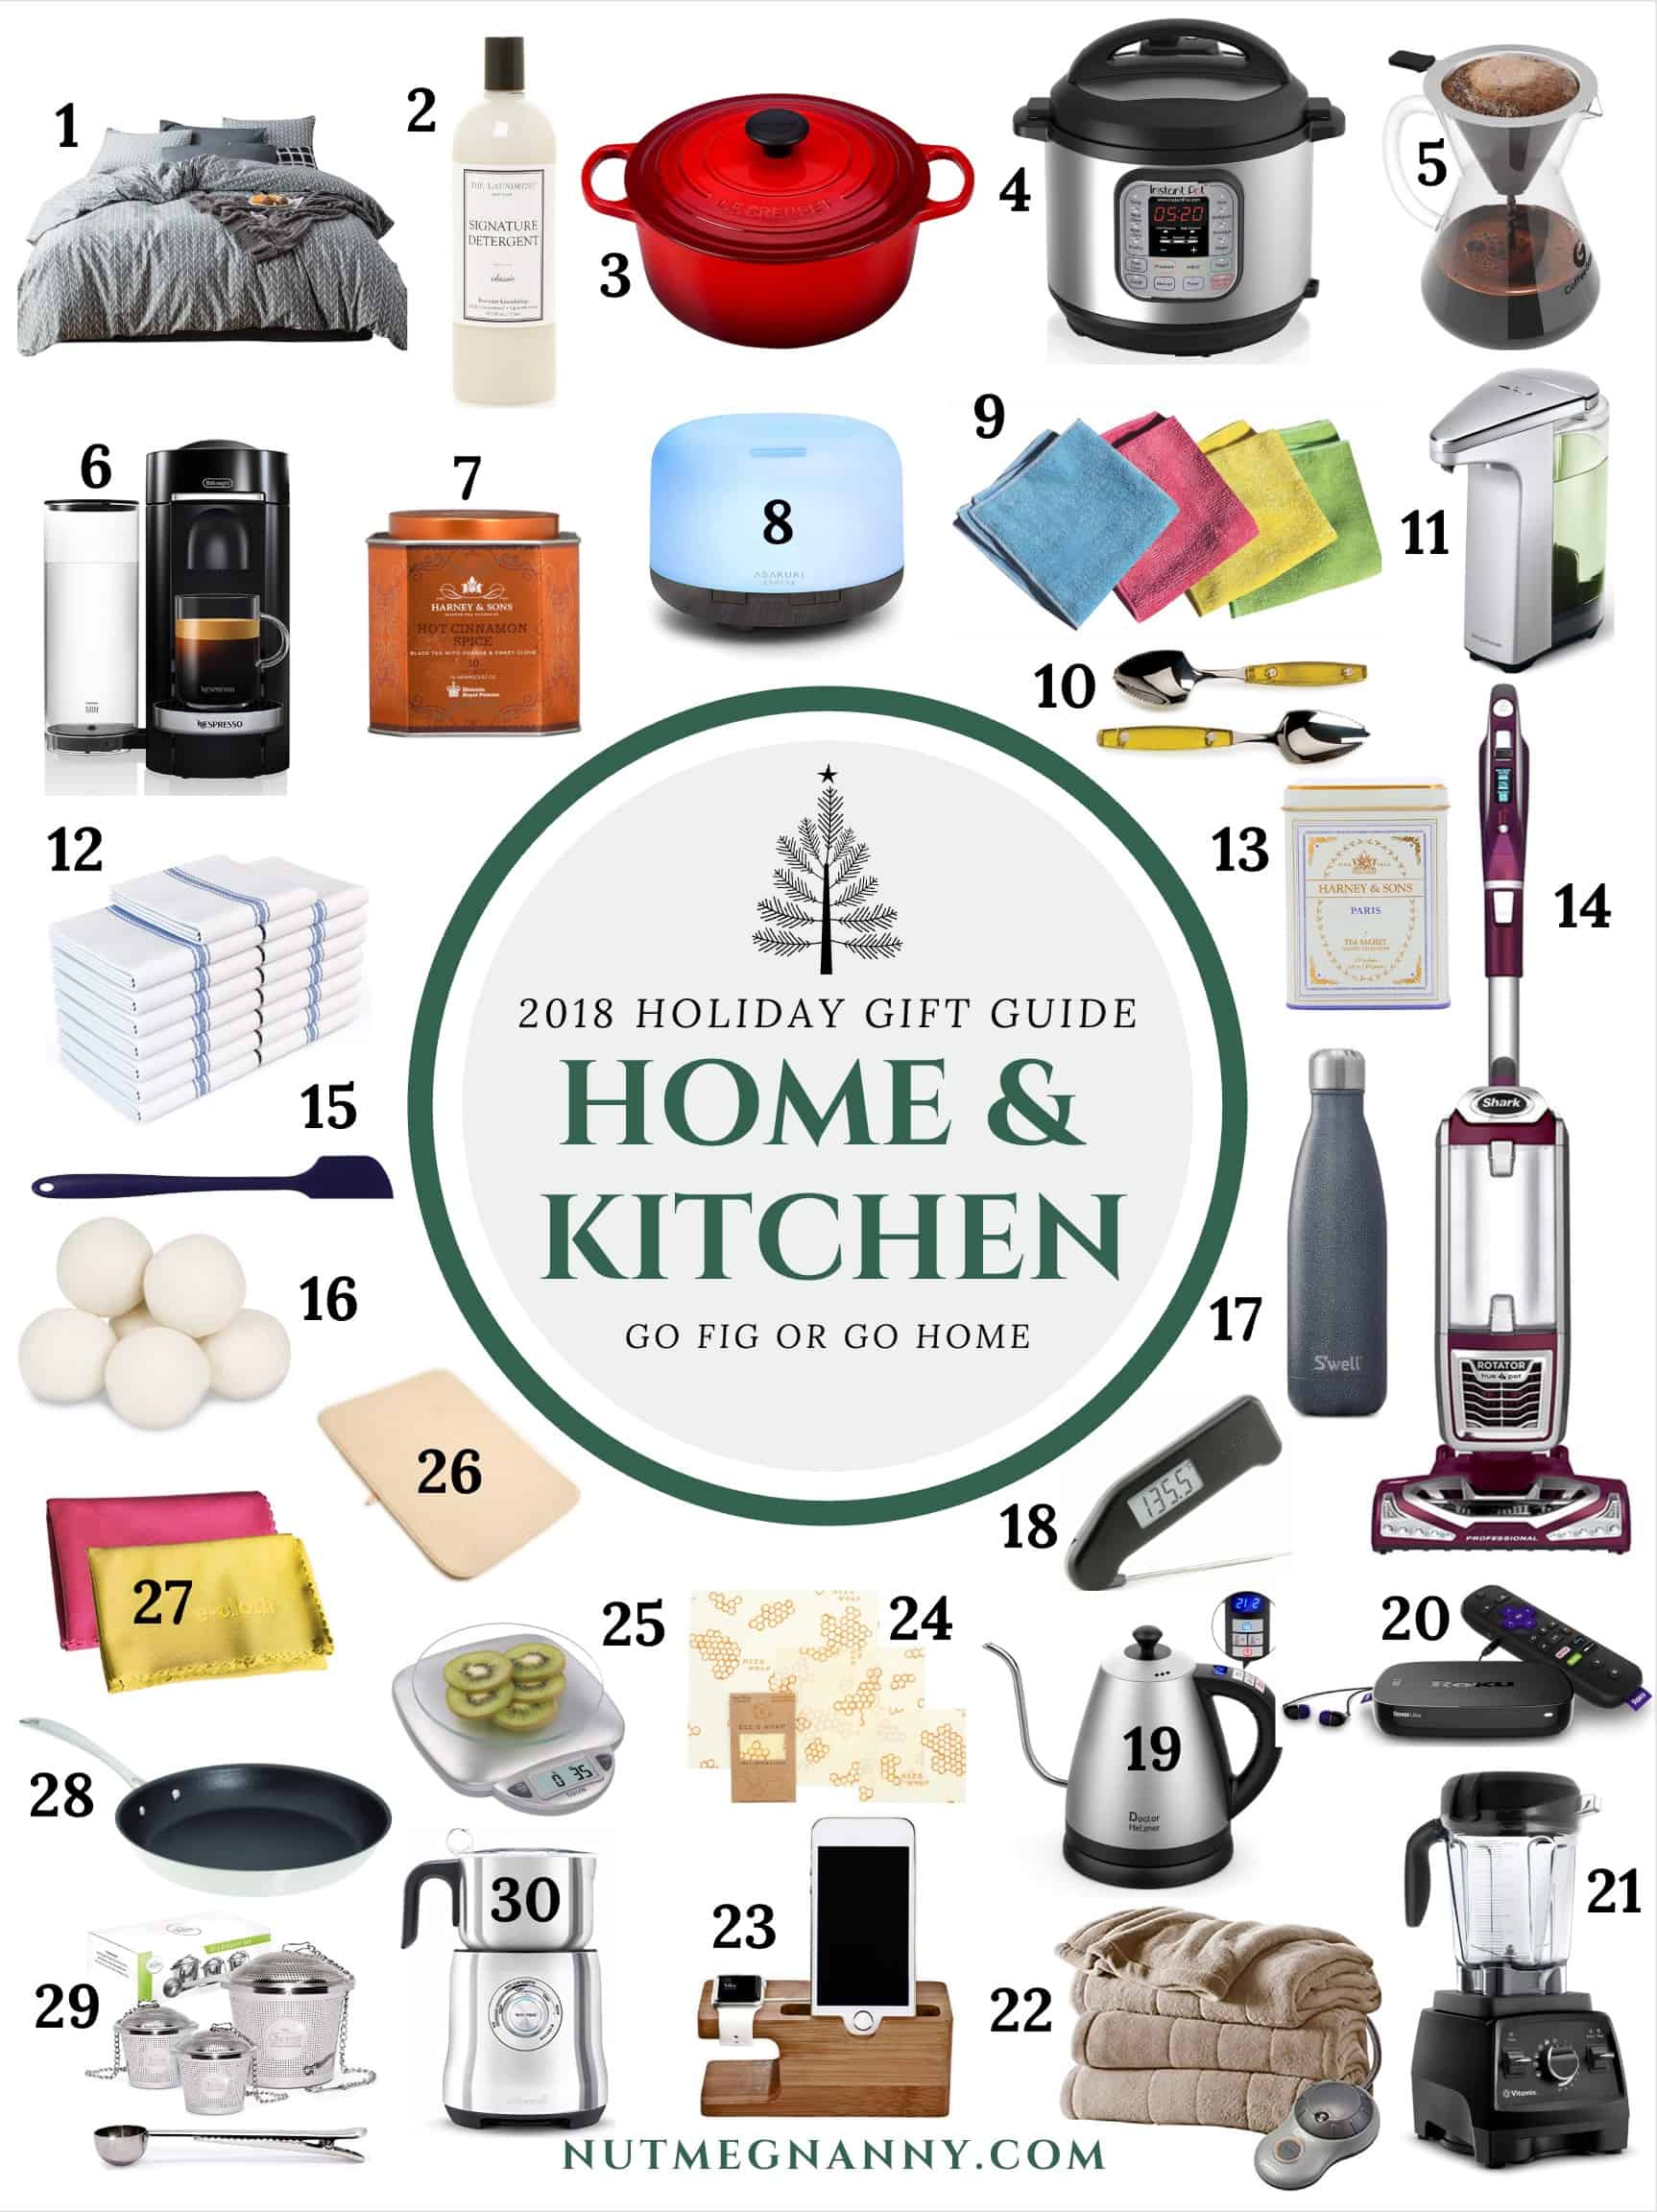 2018 Home and Kitchen Holiday Gift Guide by Nutmeg Nanny - a fun collection of home and kitchen goodies that will be perfect for anyone on your Christmas list.